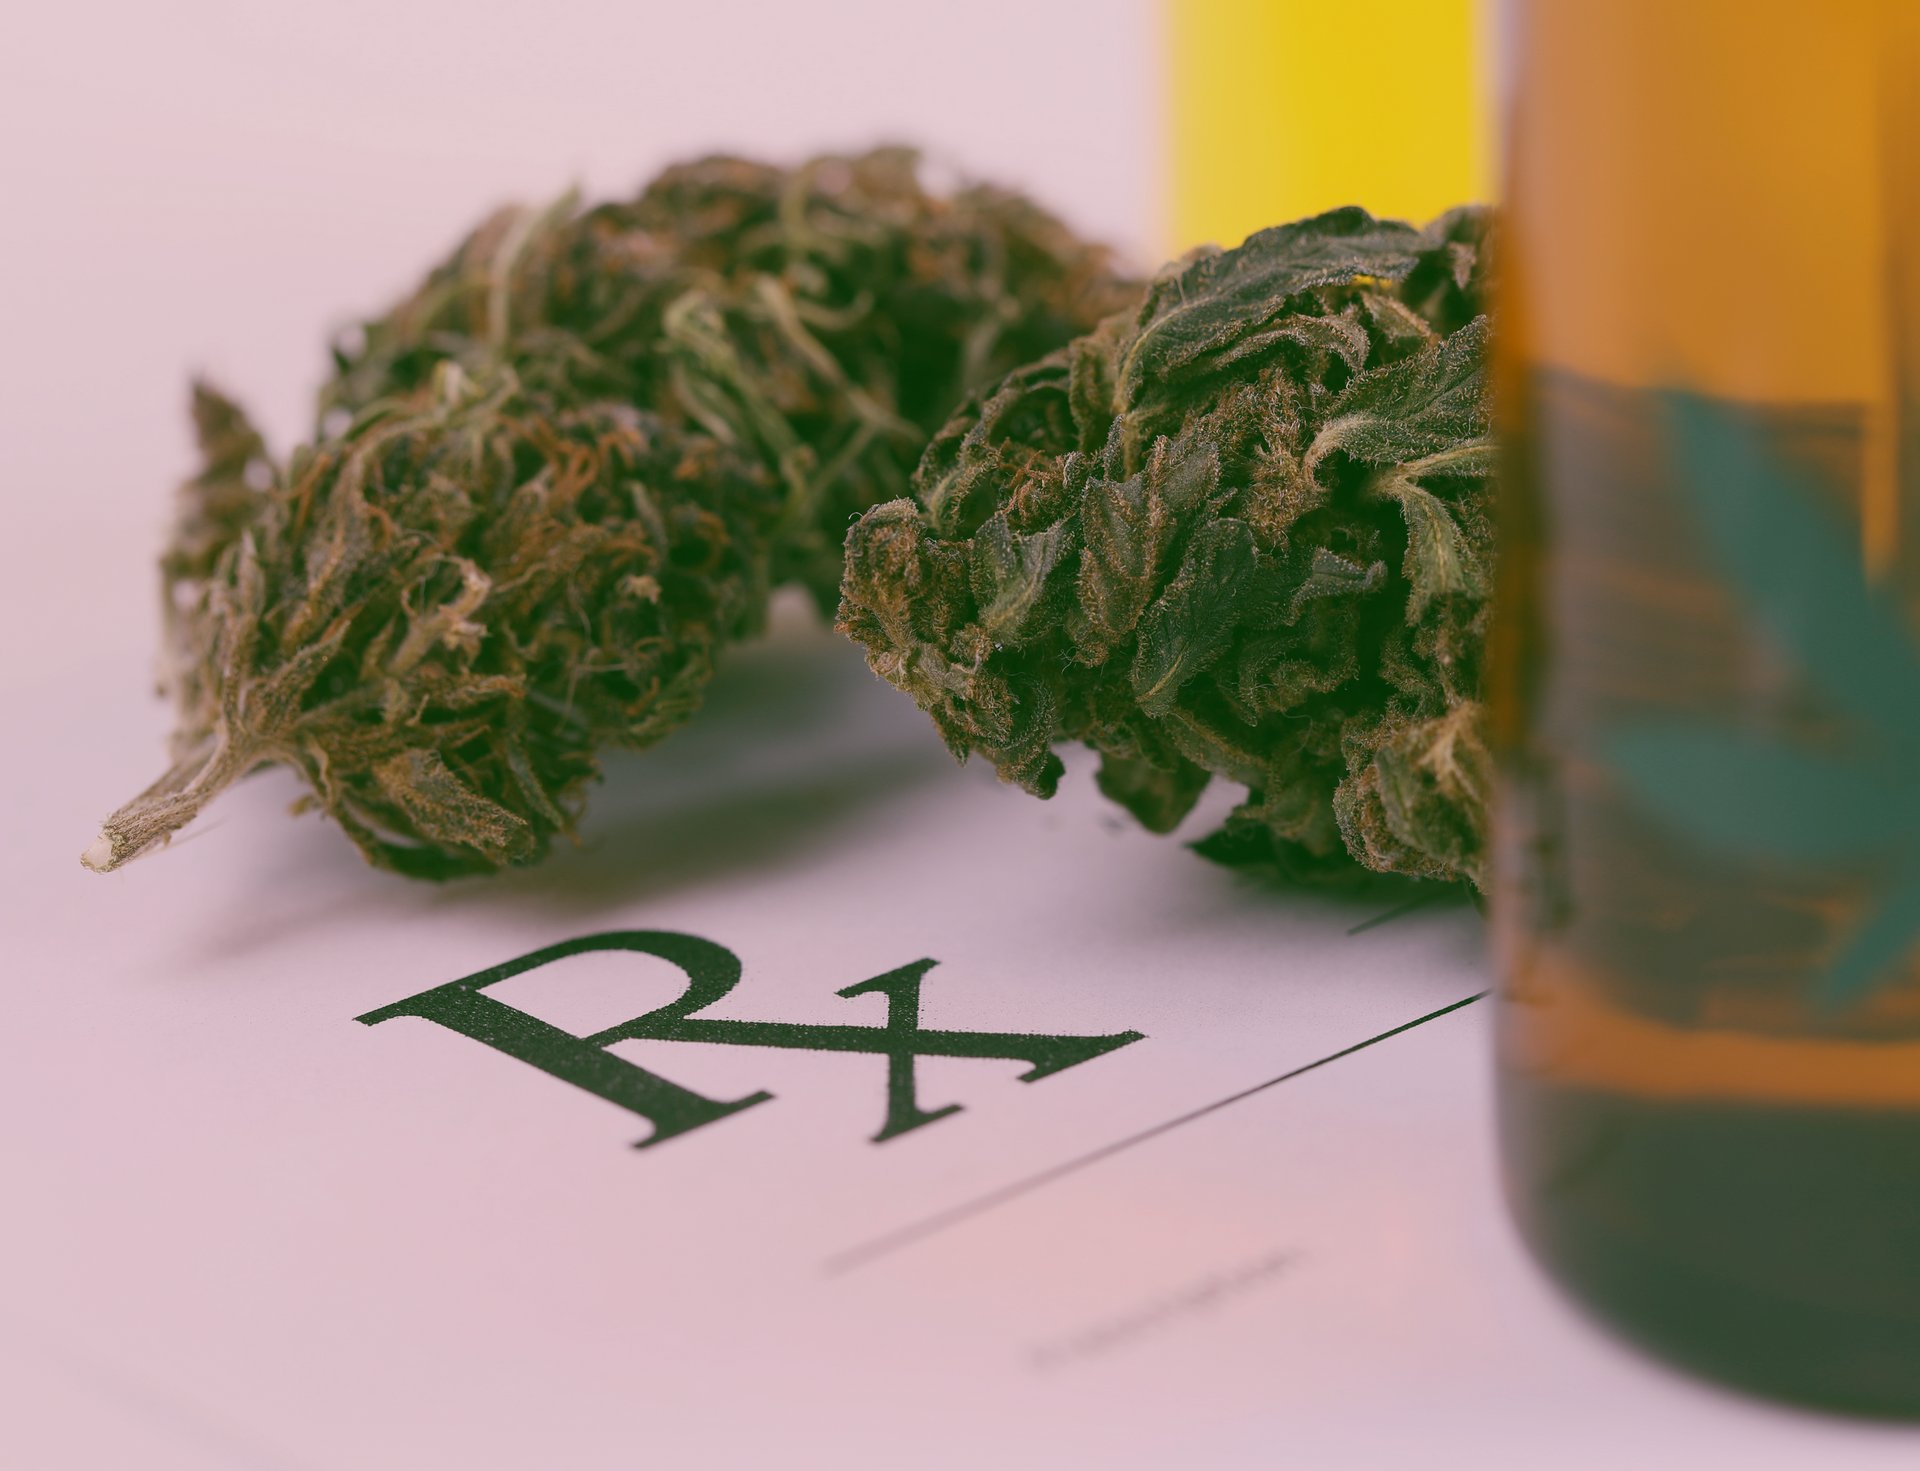 Medicinal cannabis with extract oil in bottle on prescription paper